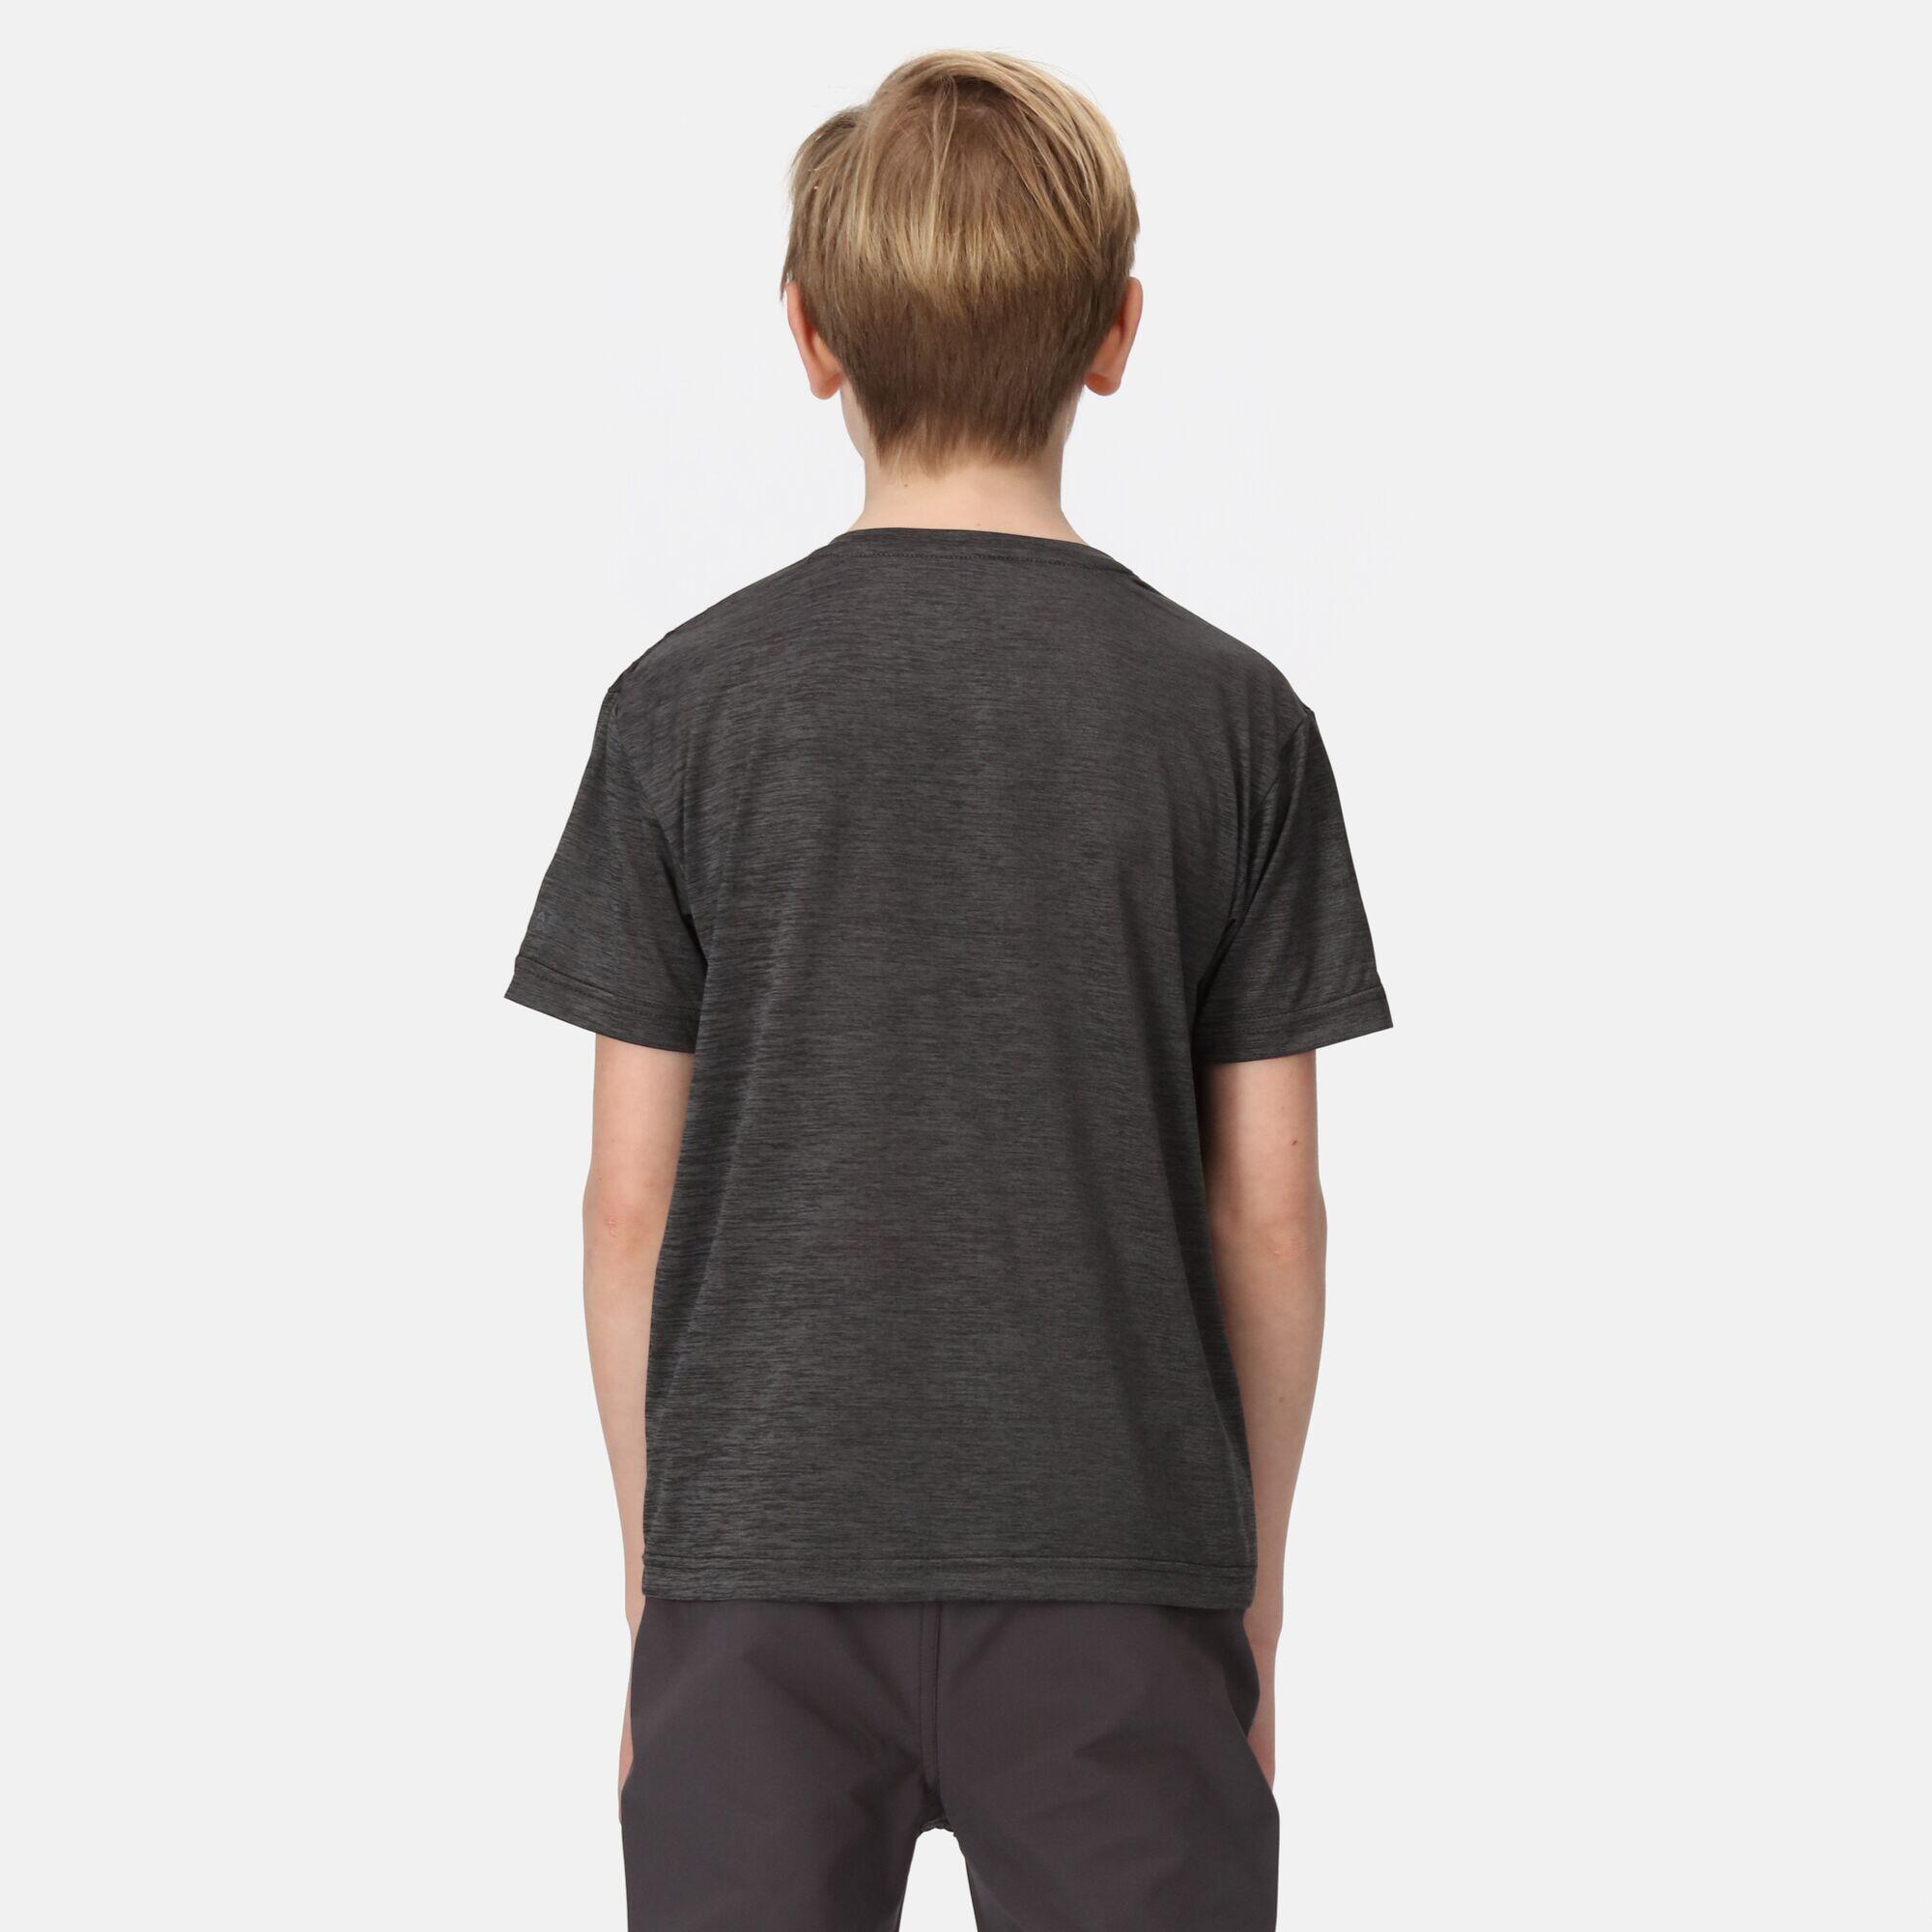 Findley Kids' Graphic Hiking T-Shirt 2/5